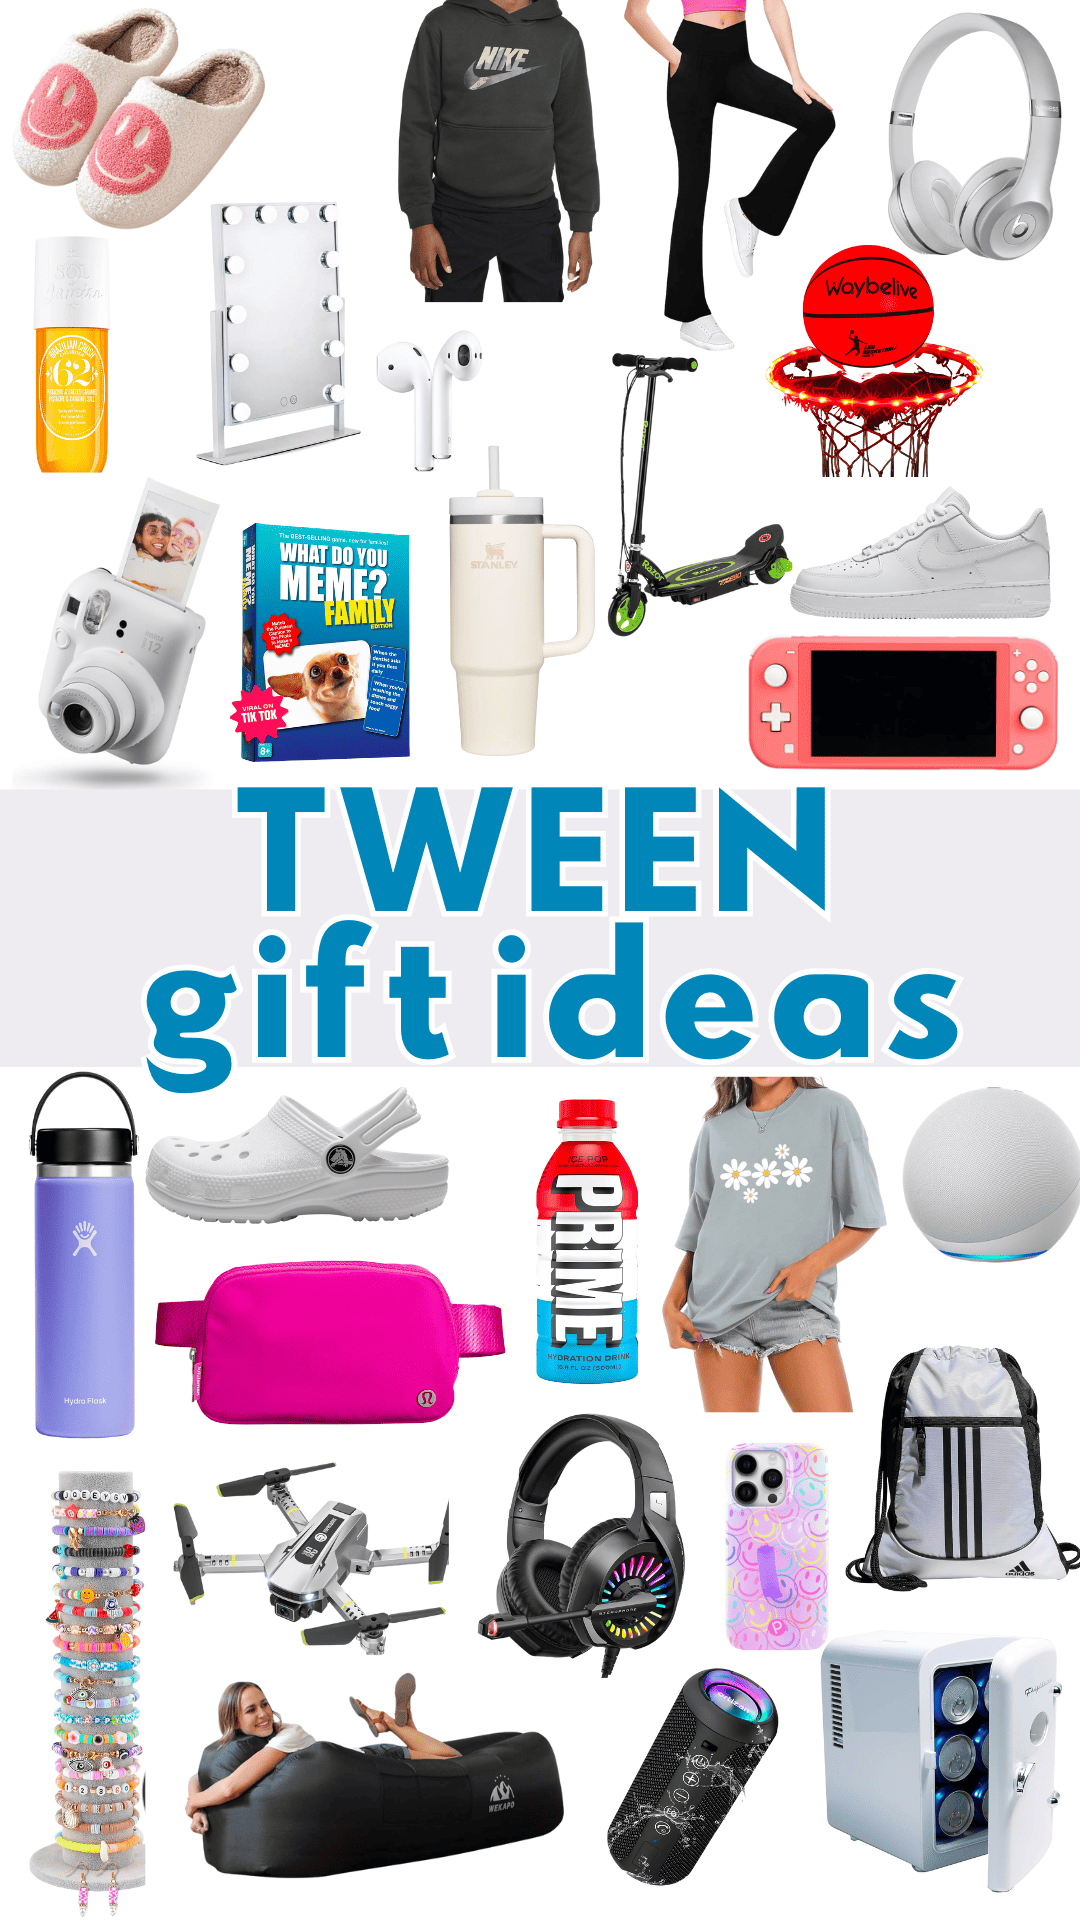 40 Amazing Gift Ideas for Tweens That Will Wow